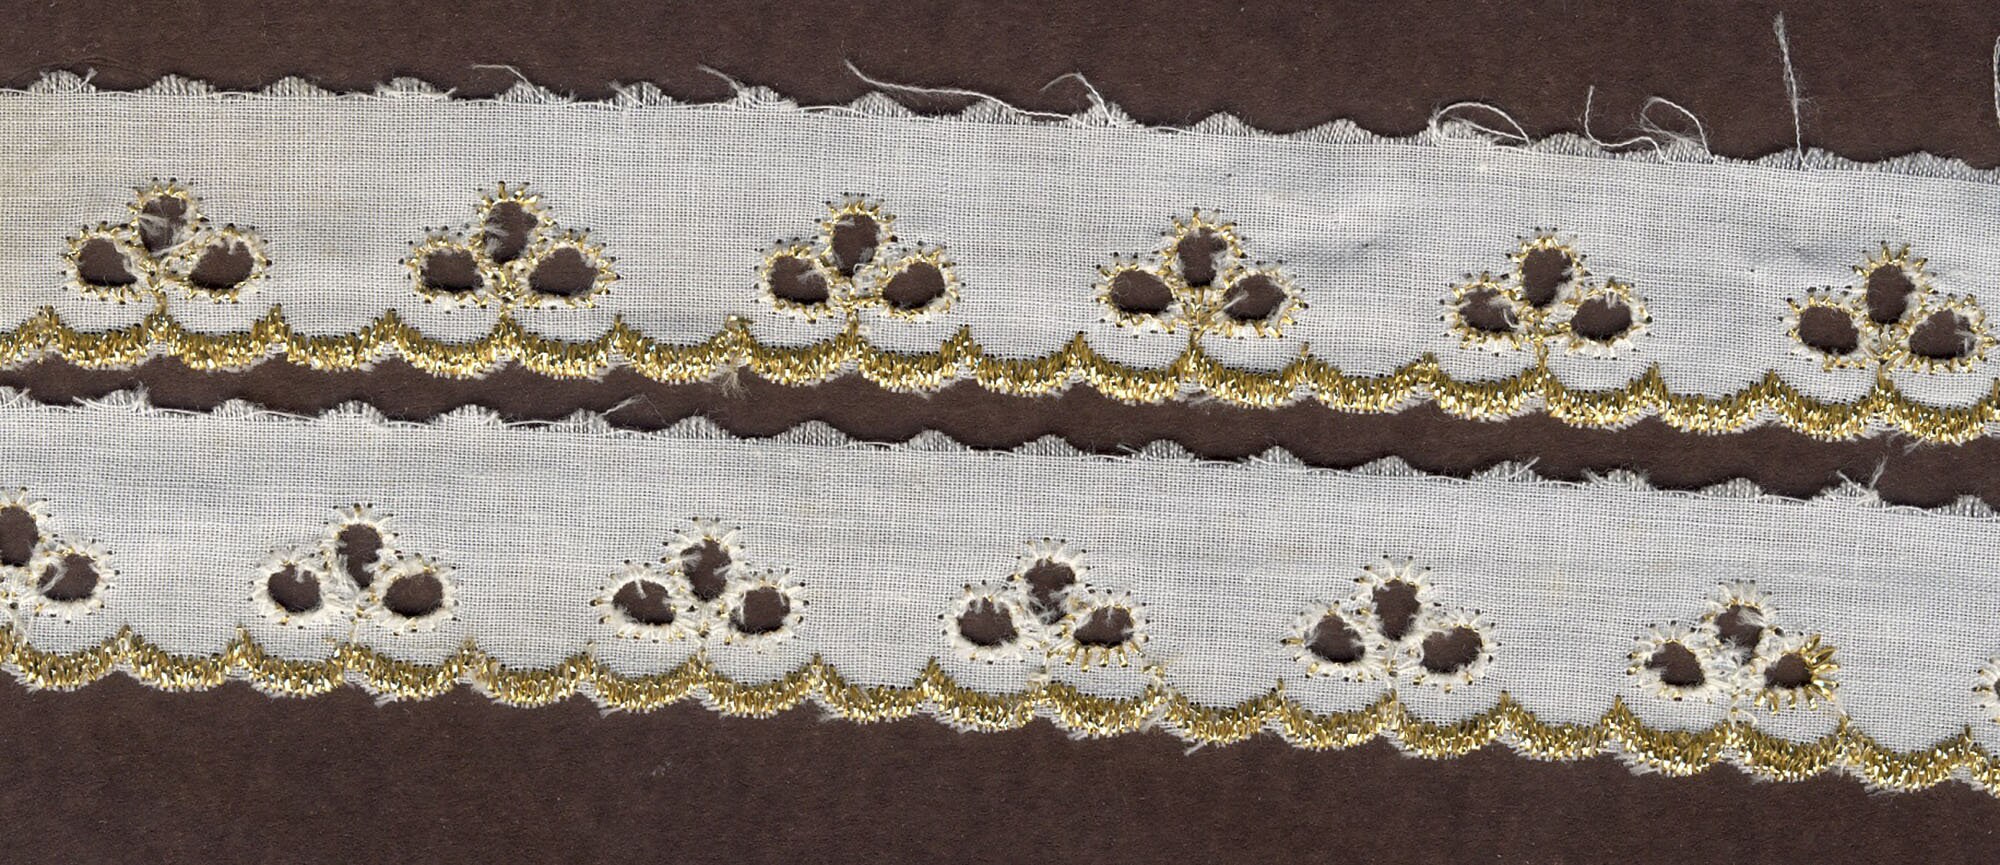 4 Inch Wide White or Cream Leavers Lace Trim 9 Yds 891 